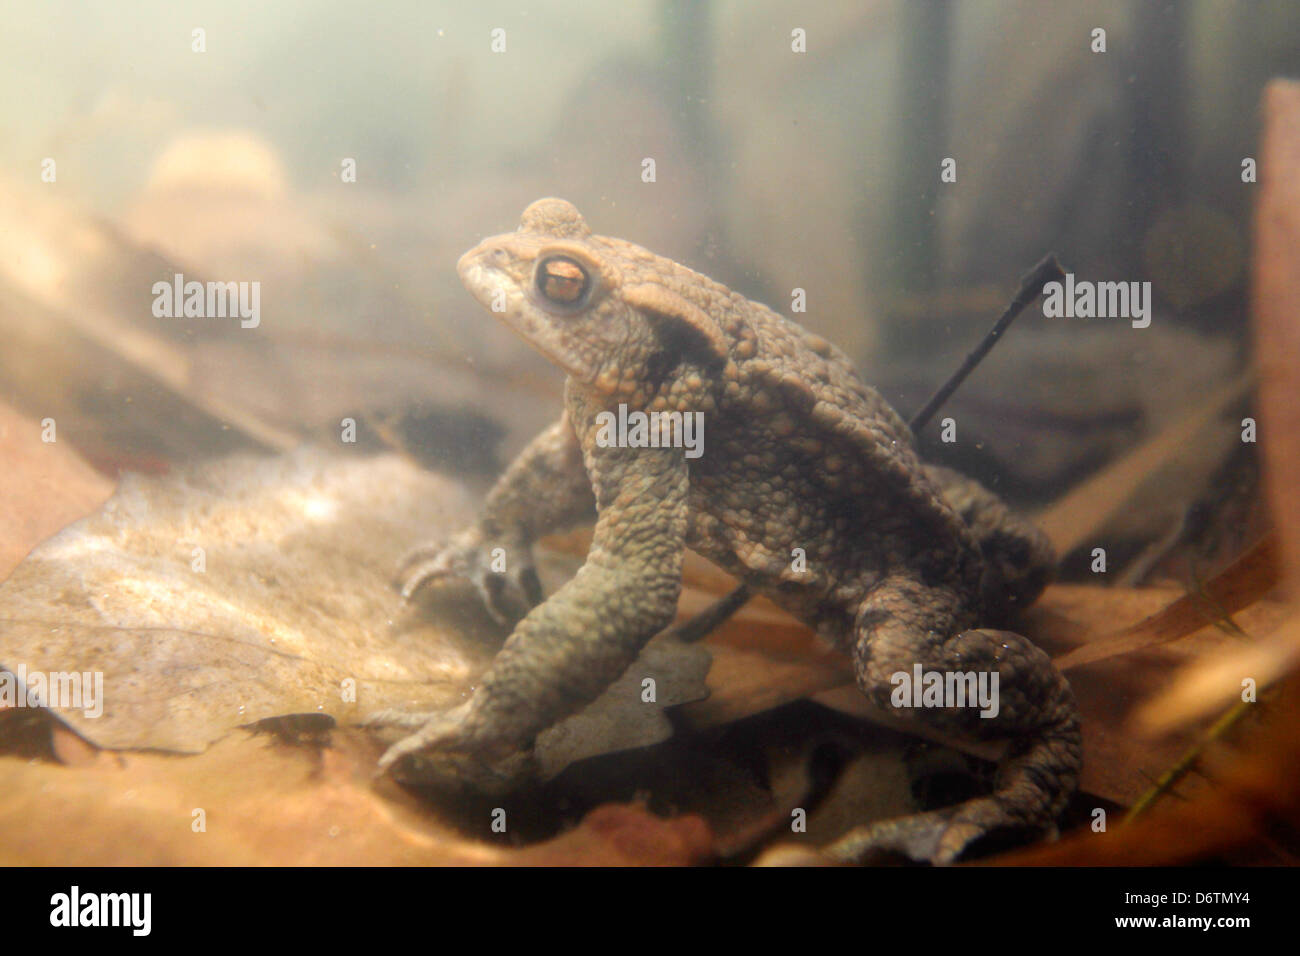 Germany/Brandenburg/Haidemuehl, a toad (european toad - bufo bufo) in a lake, 17 April 2013 Stock Photo